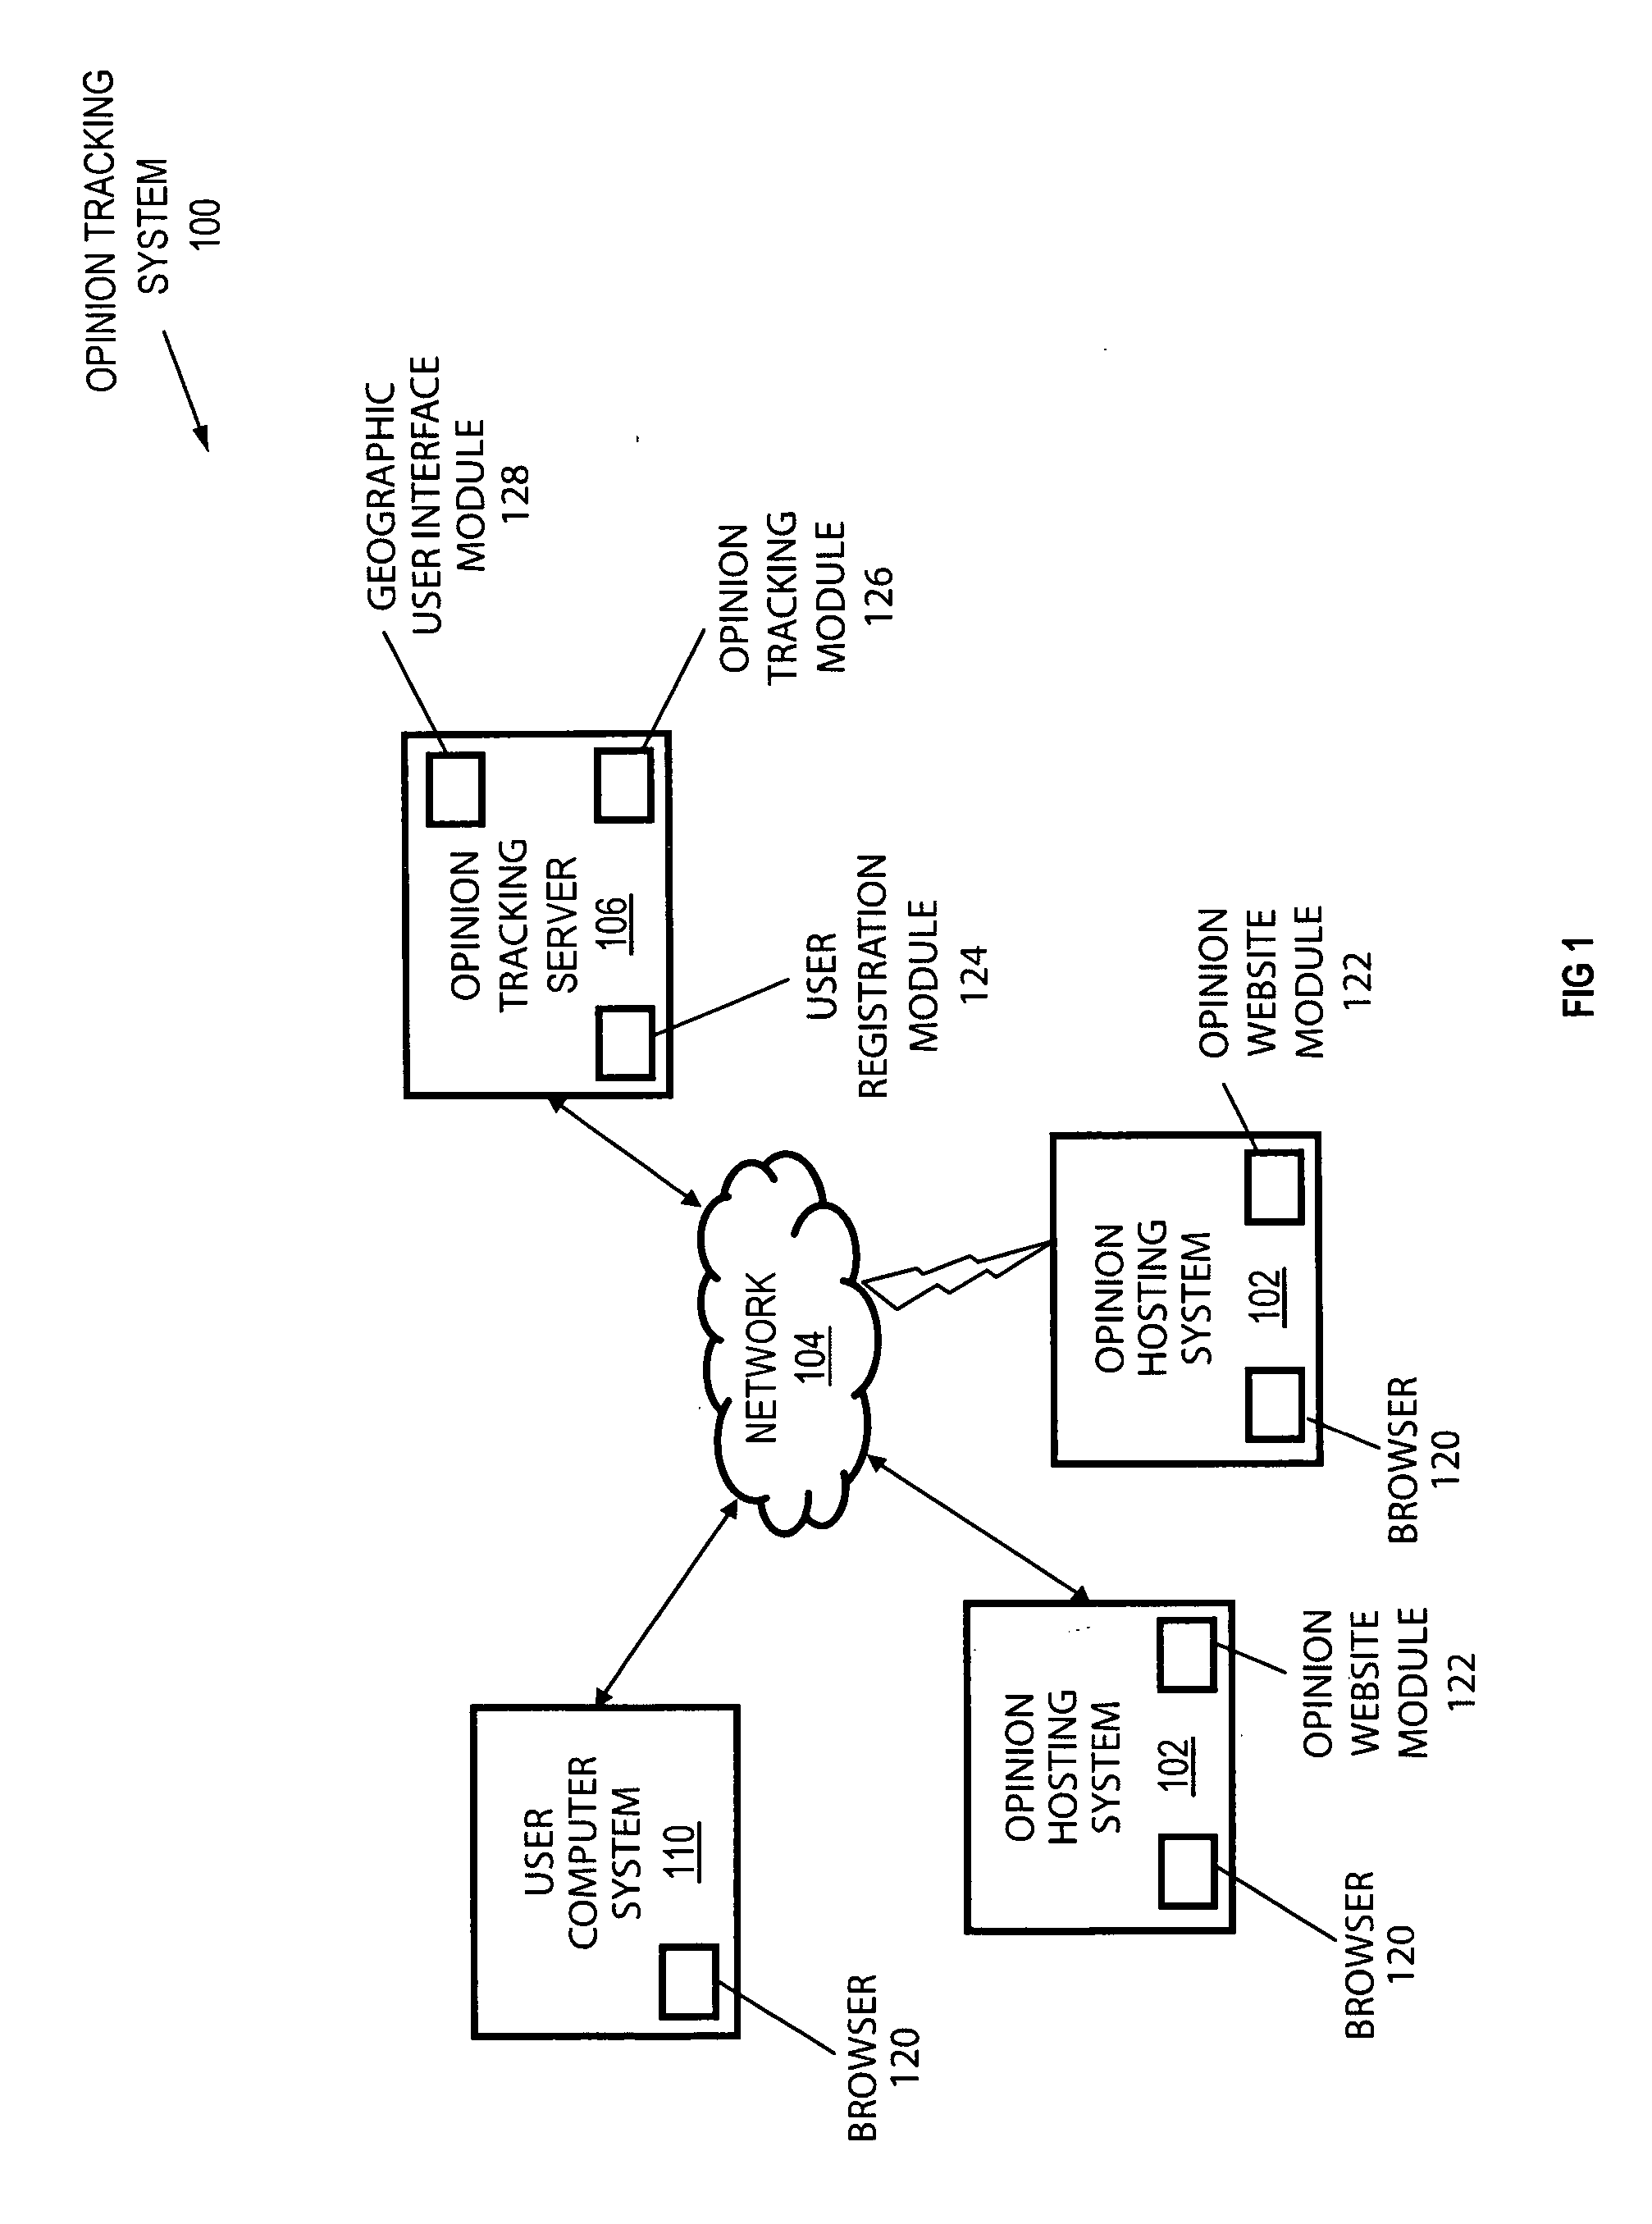 Systems, methods, and media for monitoring user specific information on websites